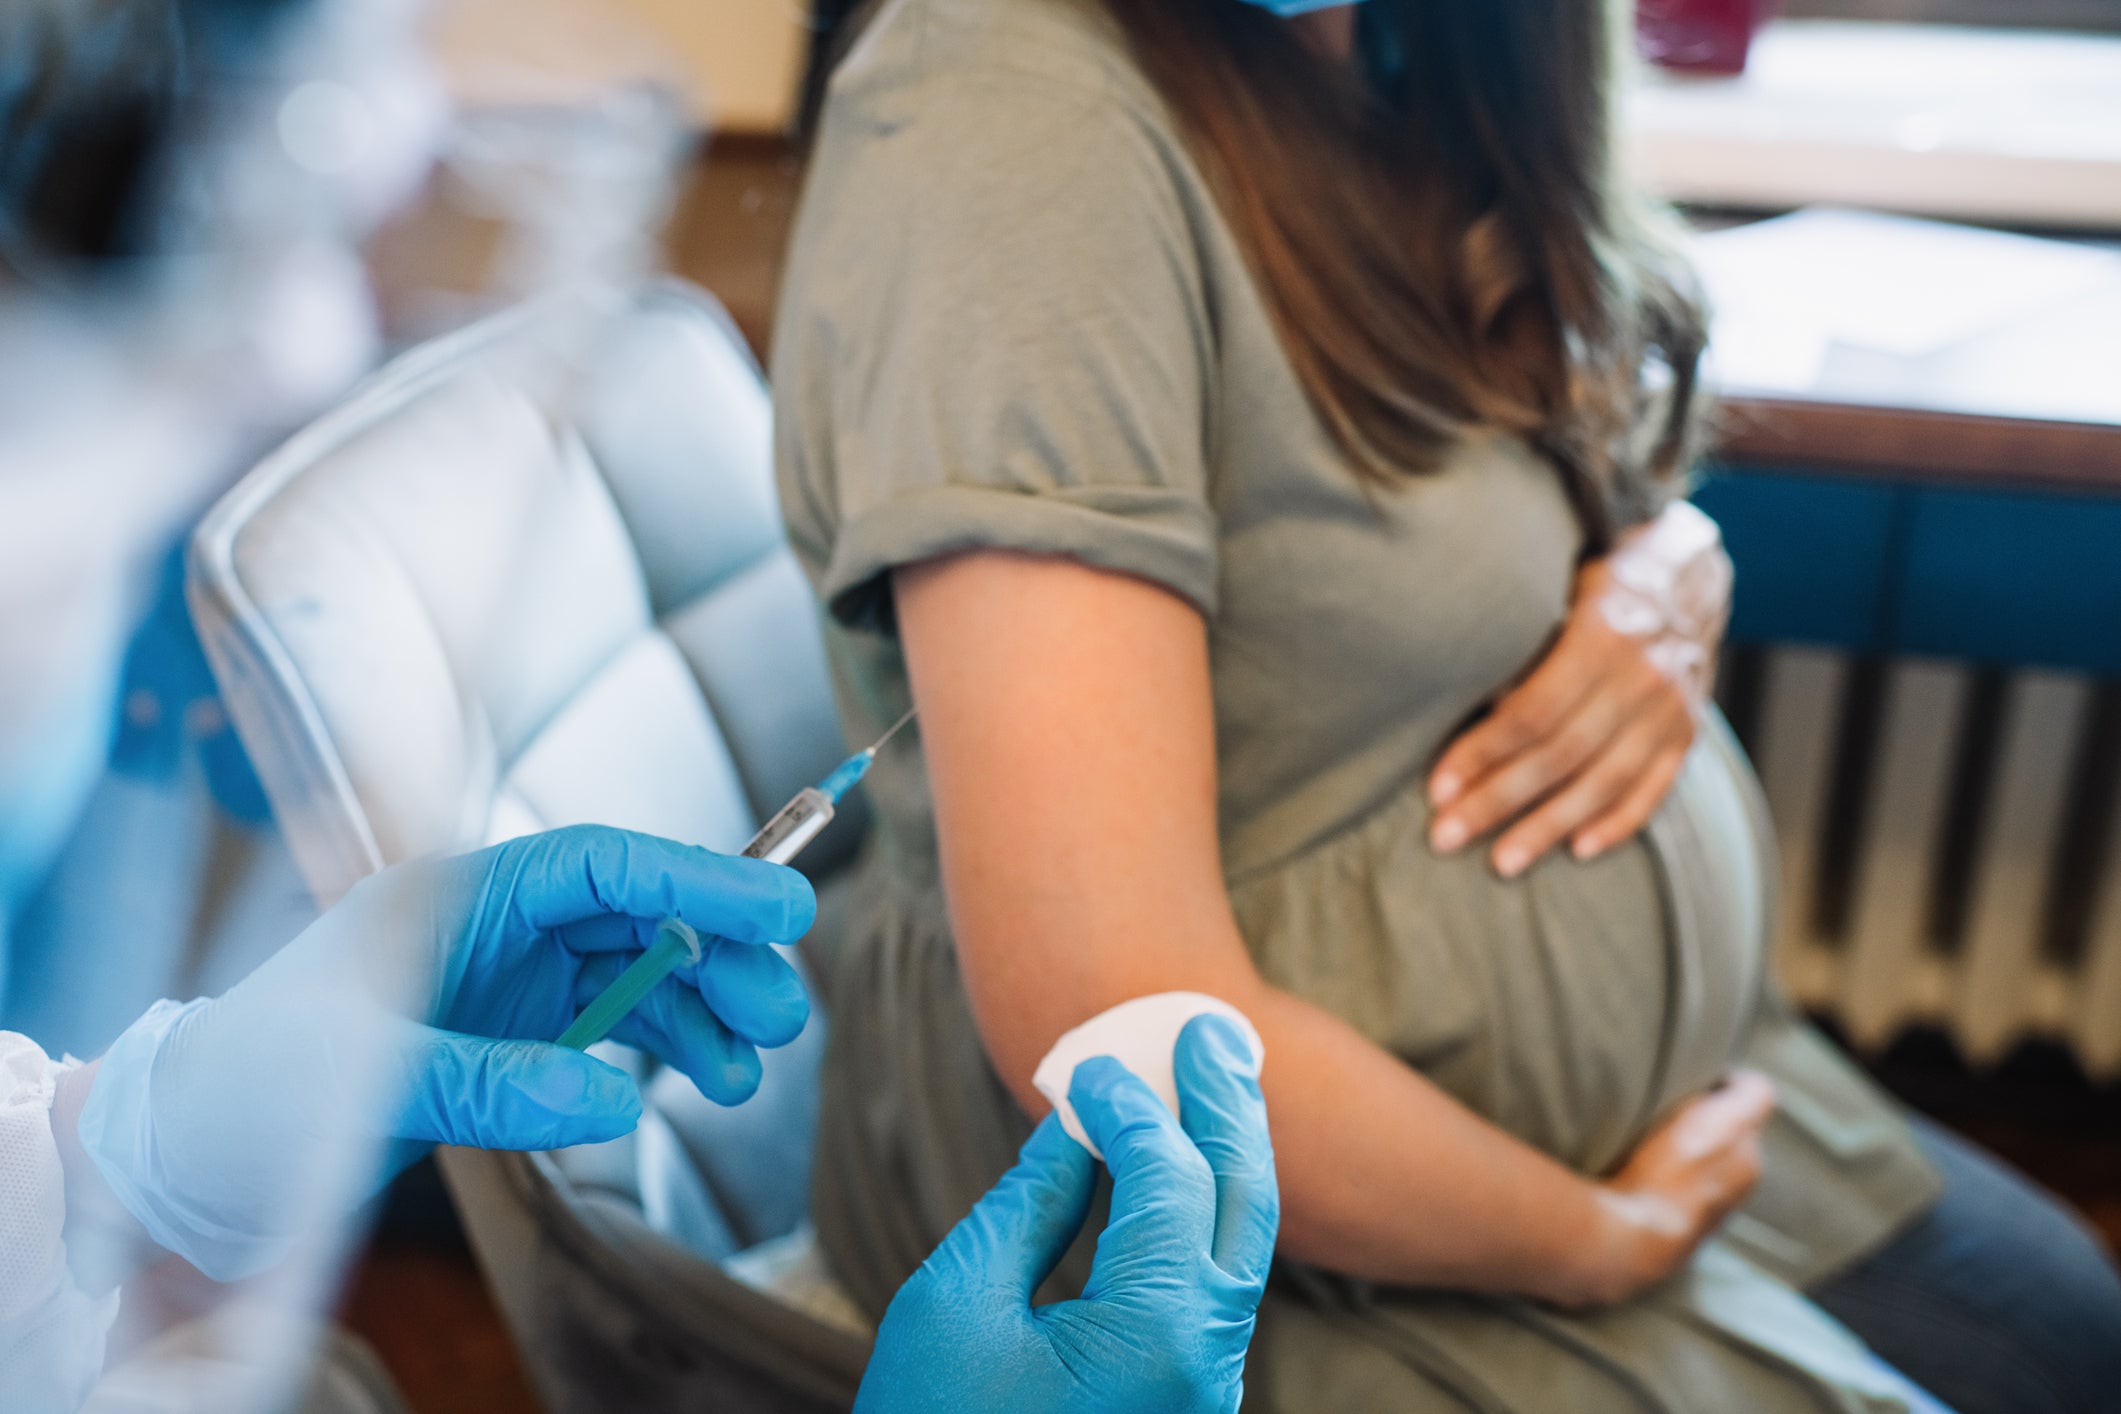 Pregnant women are urged to get vaccinated against whooping cough